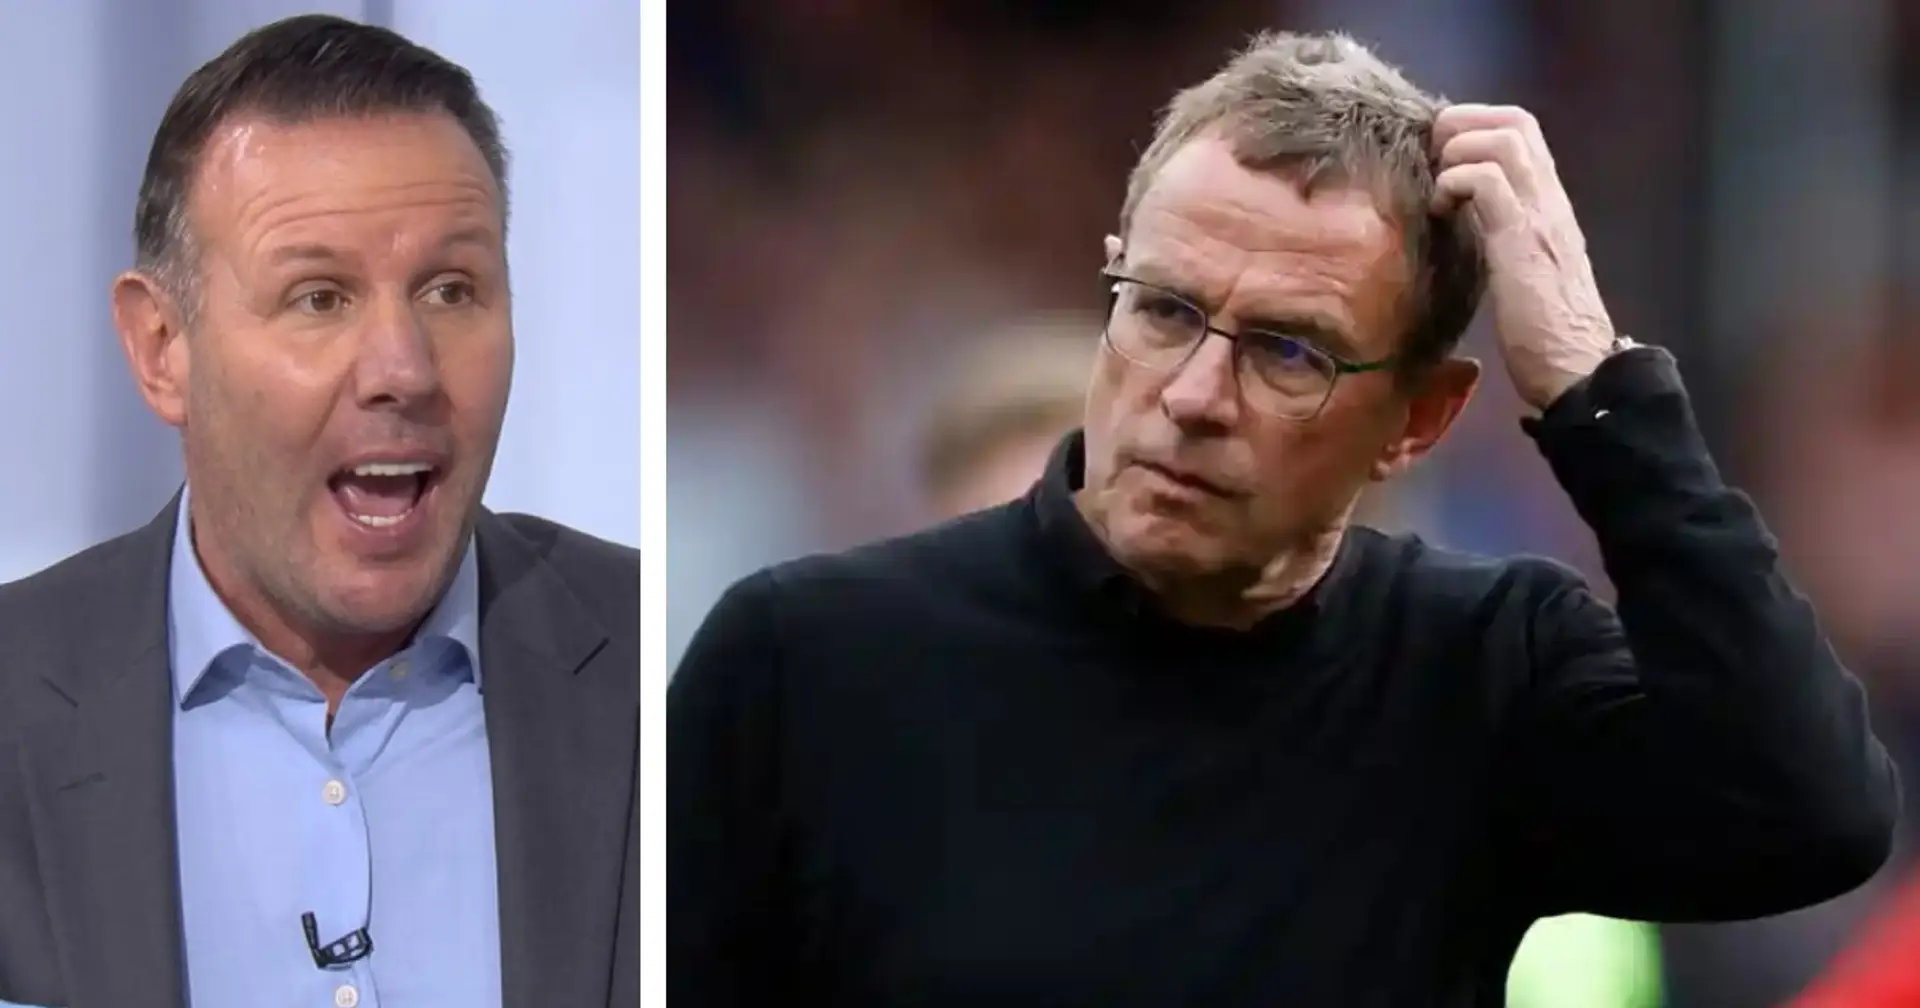 'There was nothing, absolutely nothing': Ralf Rangnick told he was 'out of his depth' to manage Man United